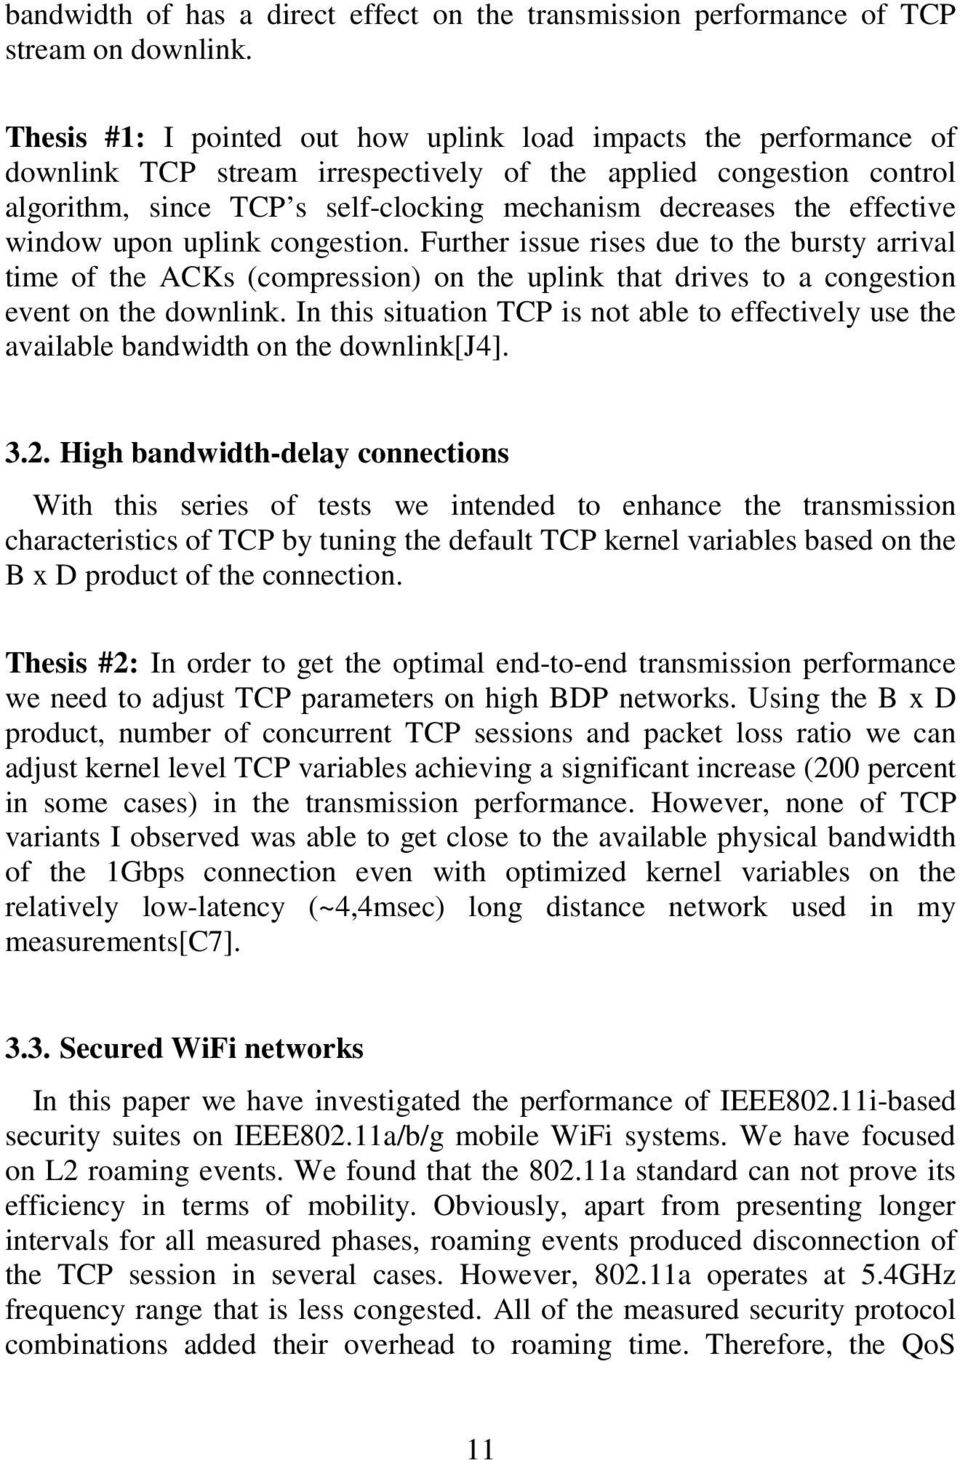 effective window upon uplink congestion. Further issue rises due to the bursty arrival time of the ACKs (compression) on the uplink that drives to a congestion event on the downlink.